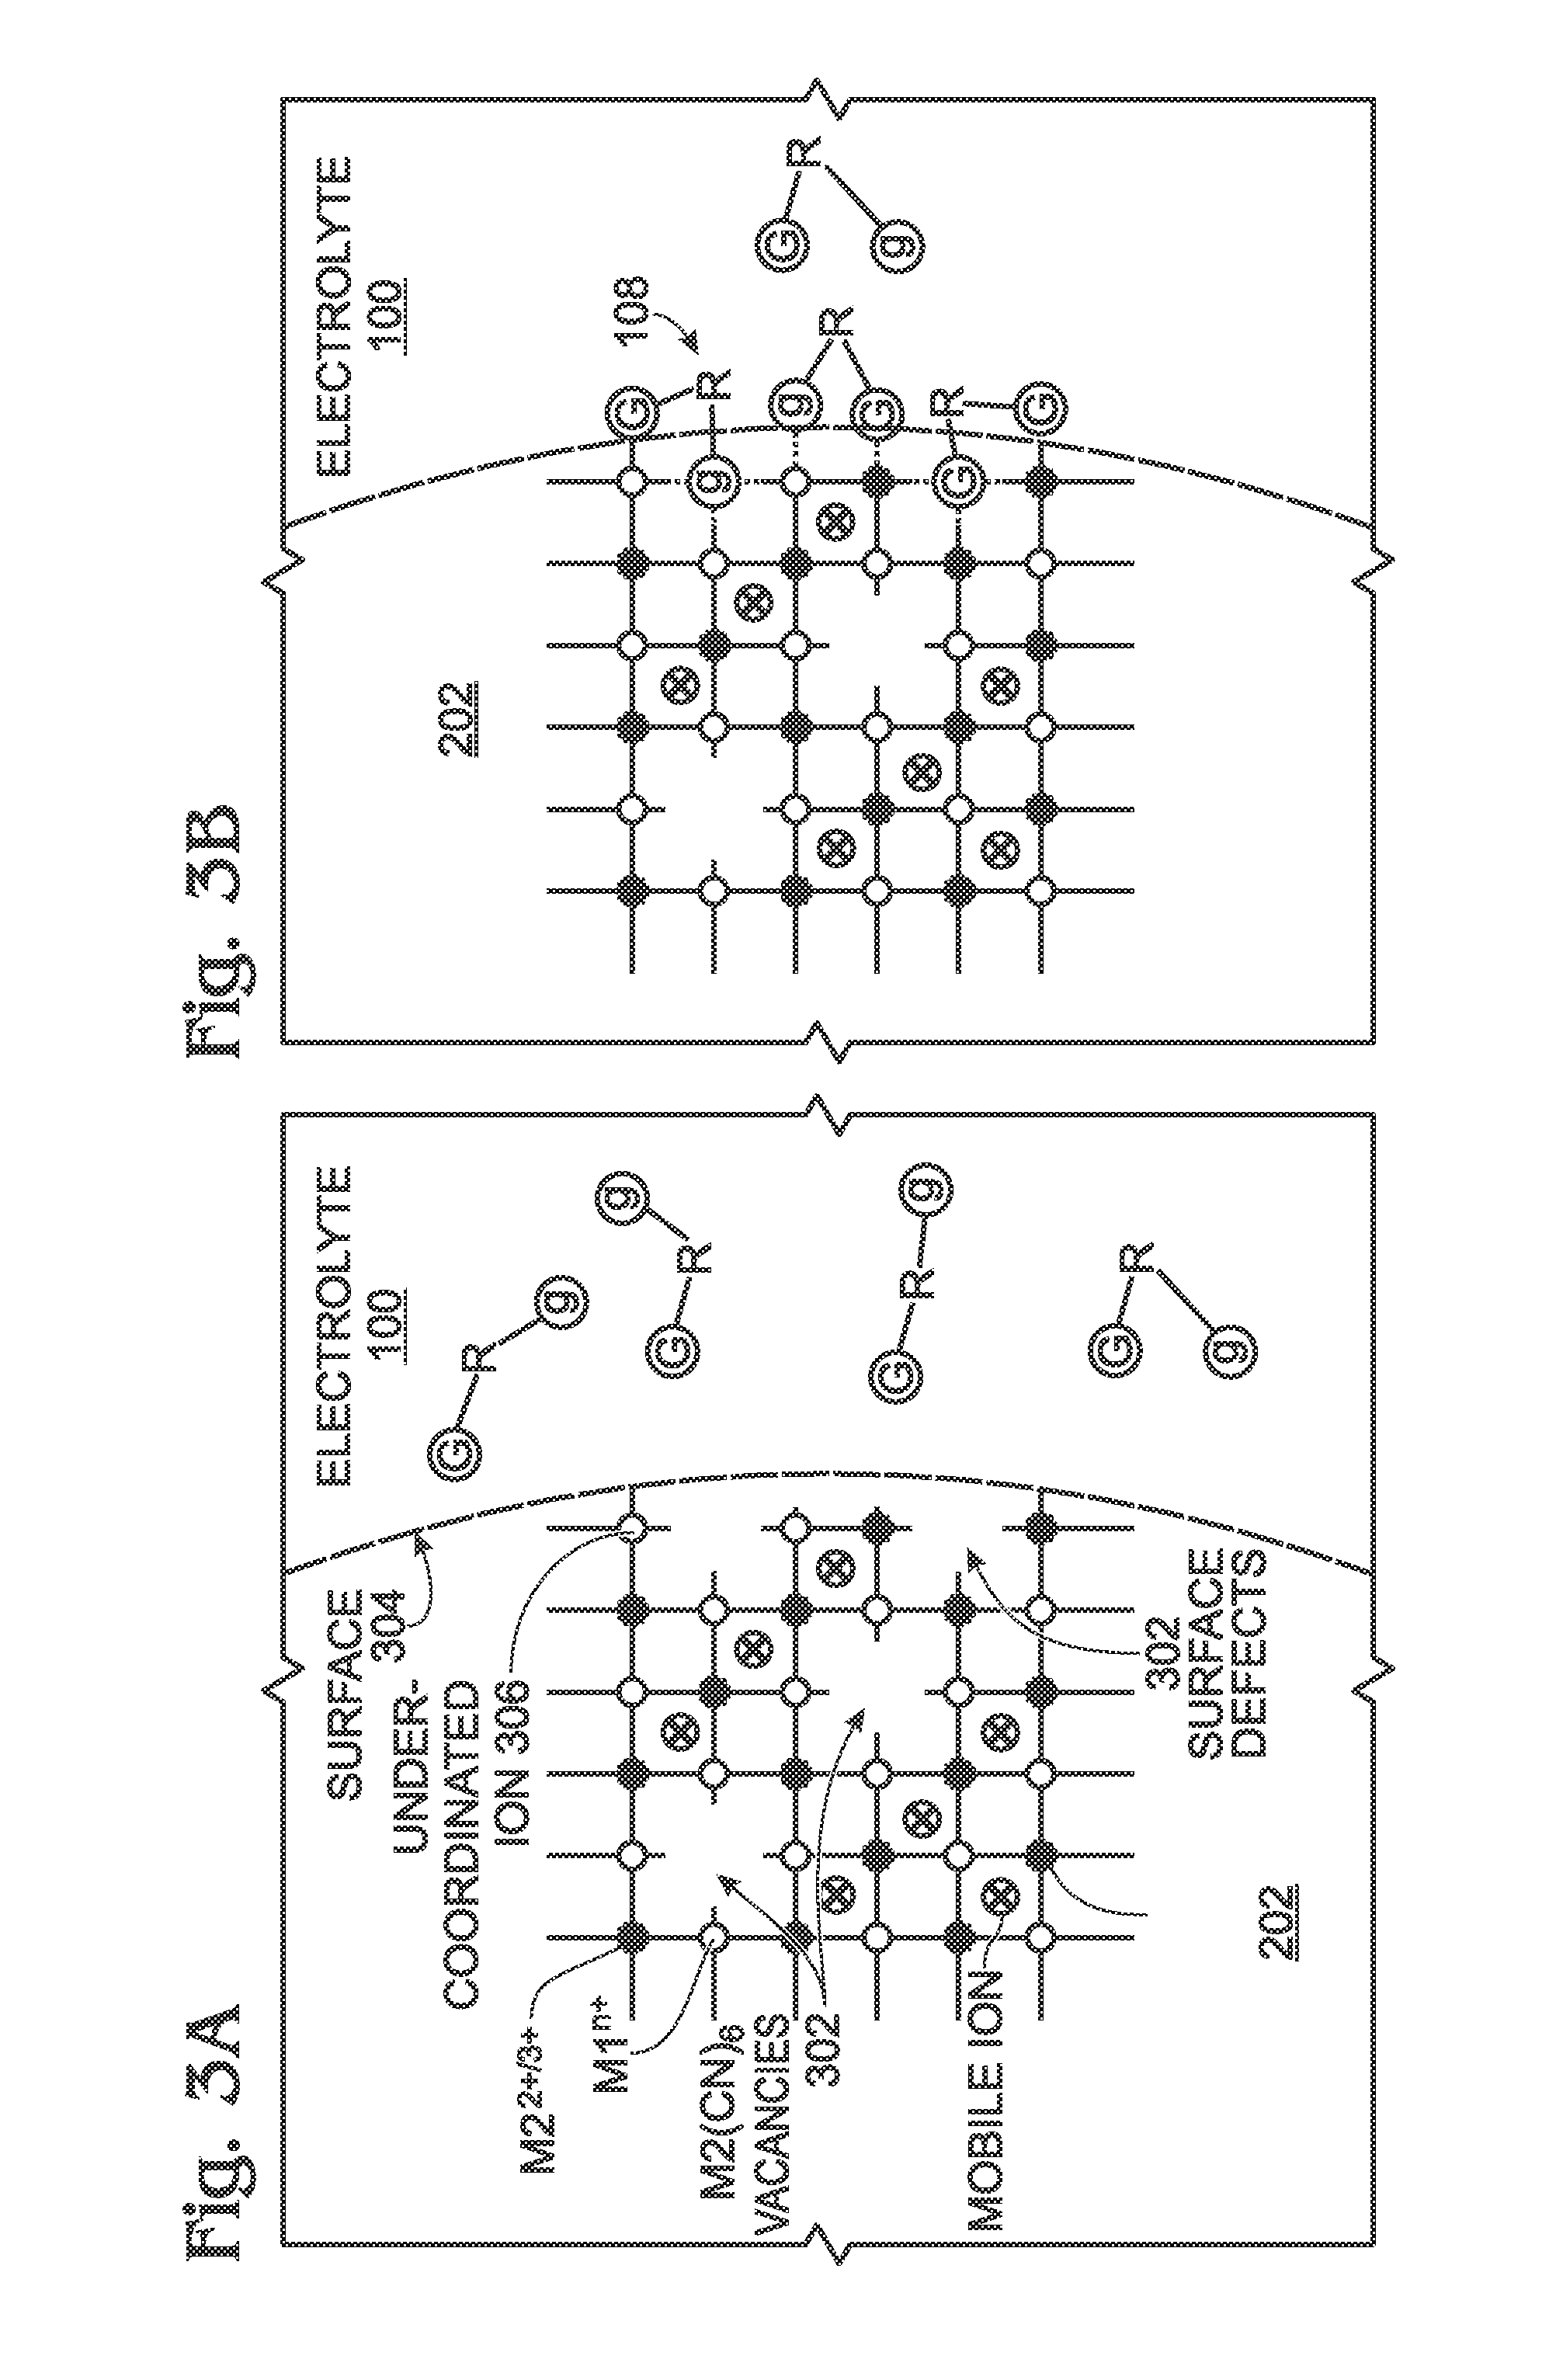 Electrolyte Additives for Transition Metal Cyanometallate Electrode Stabilization